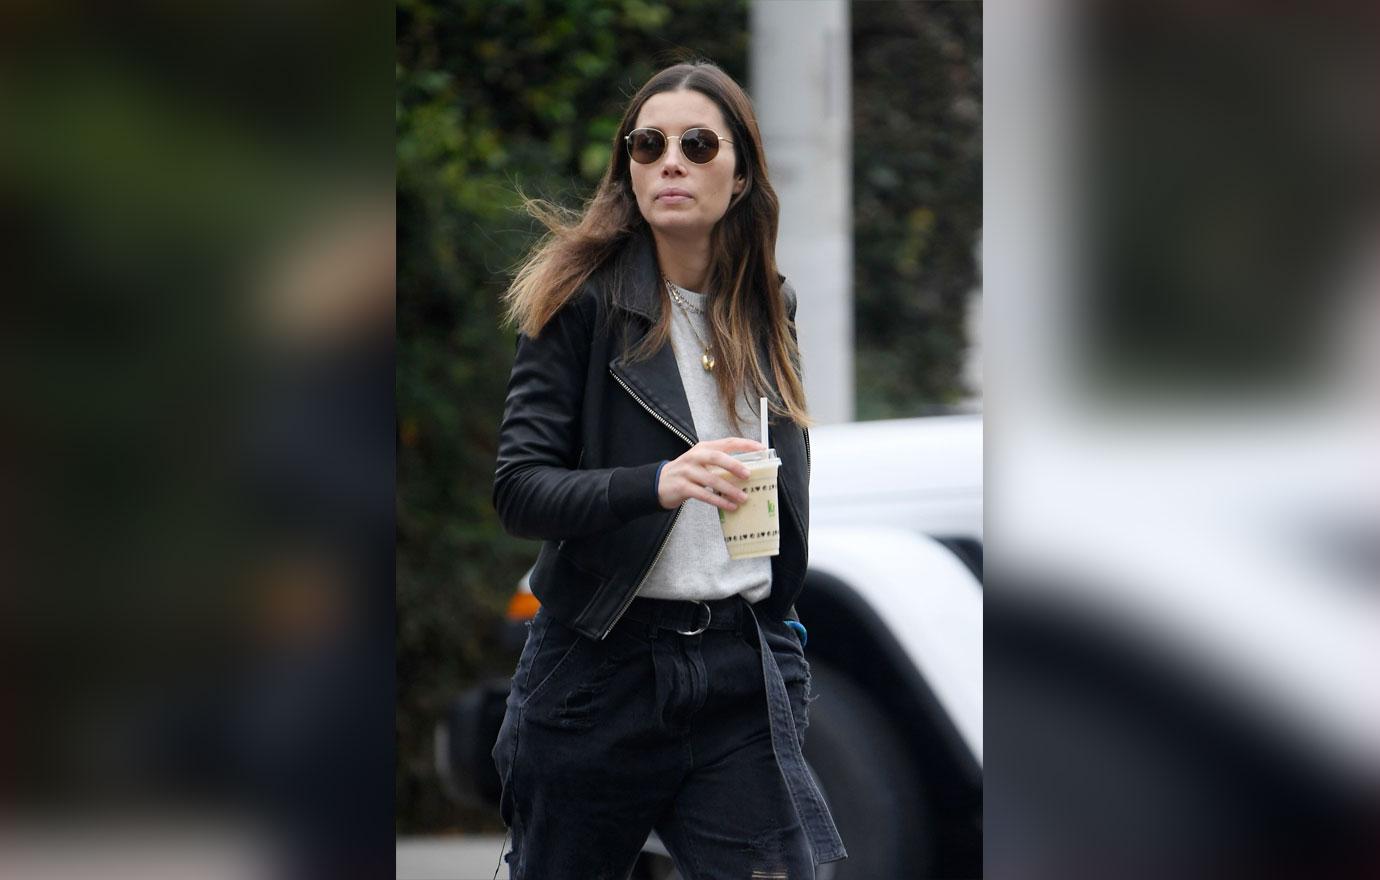 Jessica Biel flaunts her wealth by flashing $4,000 limited edition